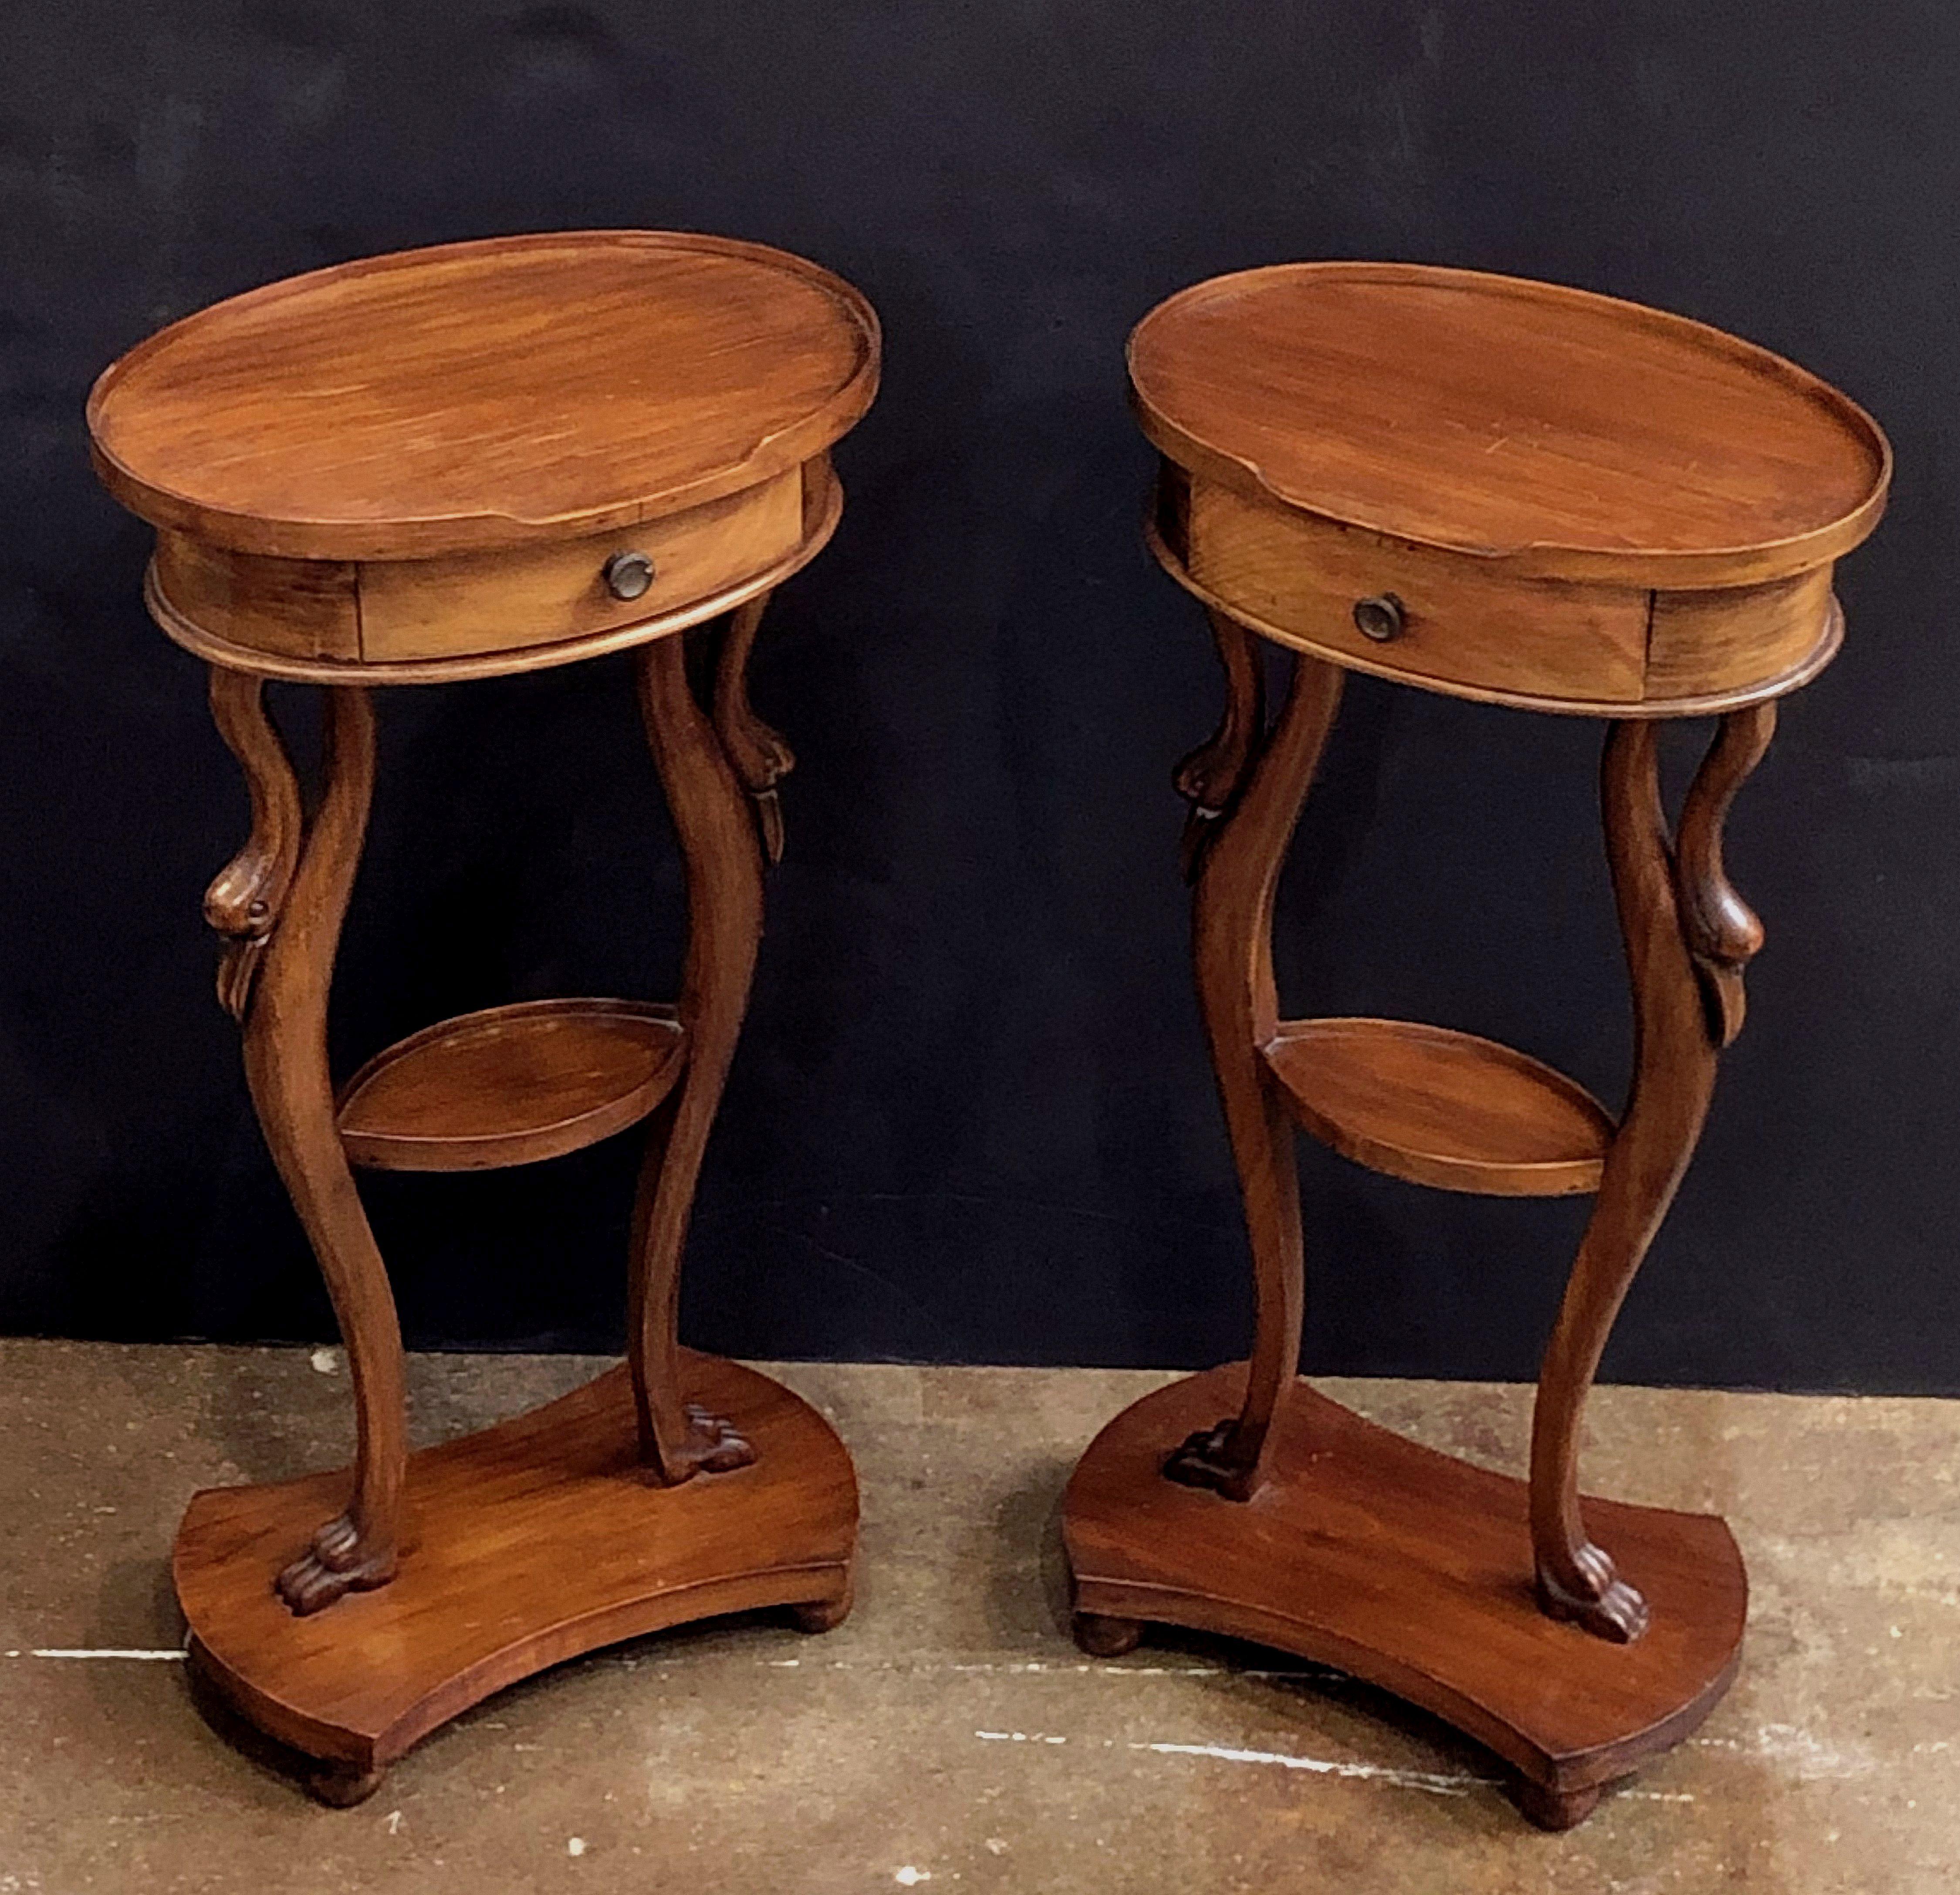 A pair of fine French nightstands or bedside end tables of mahogany, each with an oval top with gallery surround over a shaped frieze with a drawer, set upon a turned leg support with shelf, the support featuring a design of swans, over a small